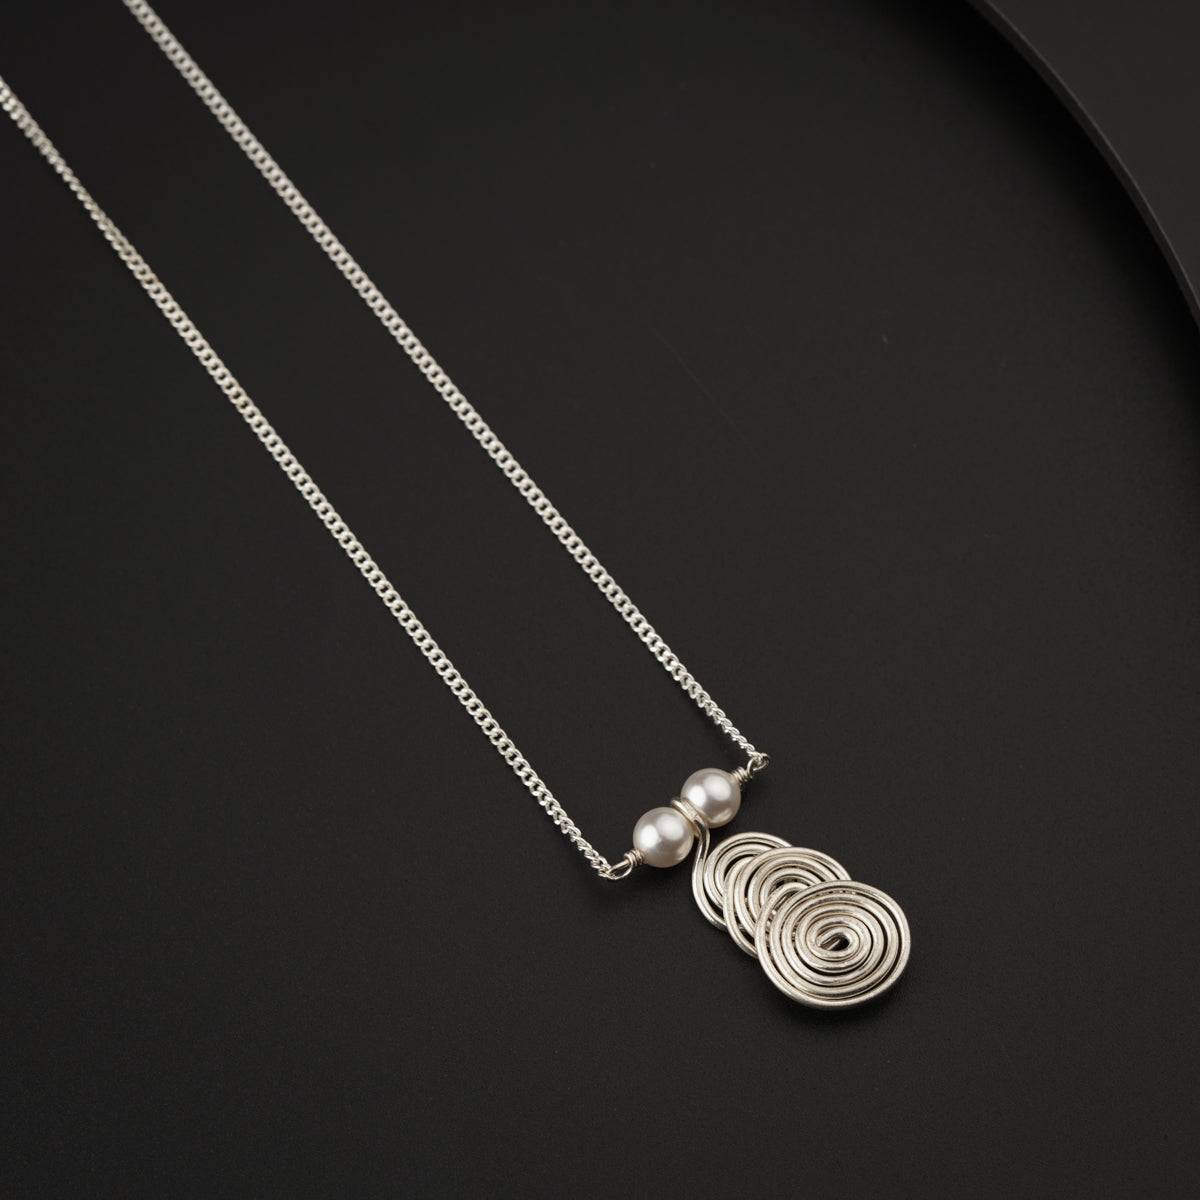 Silver Spiral Pendant Necklace